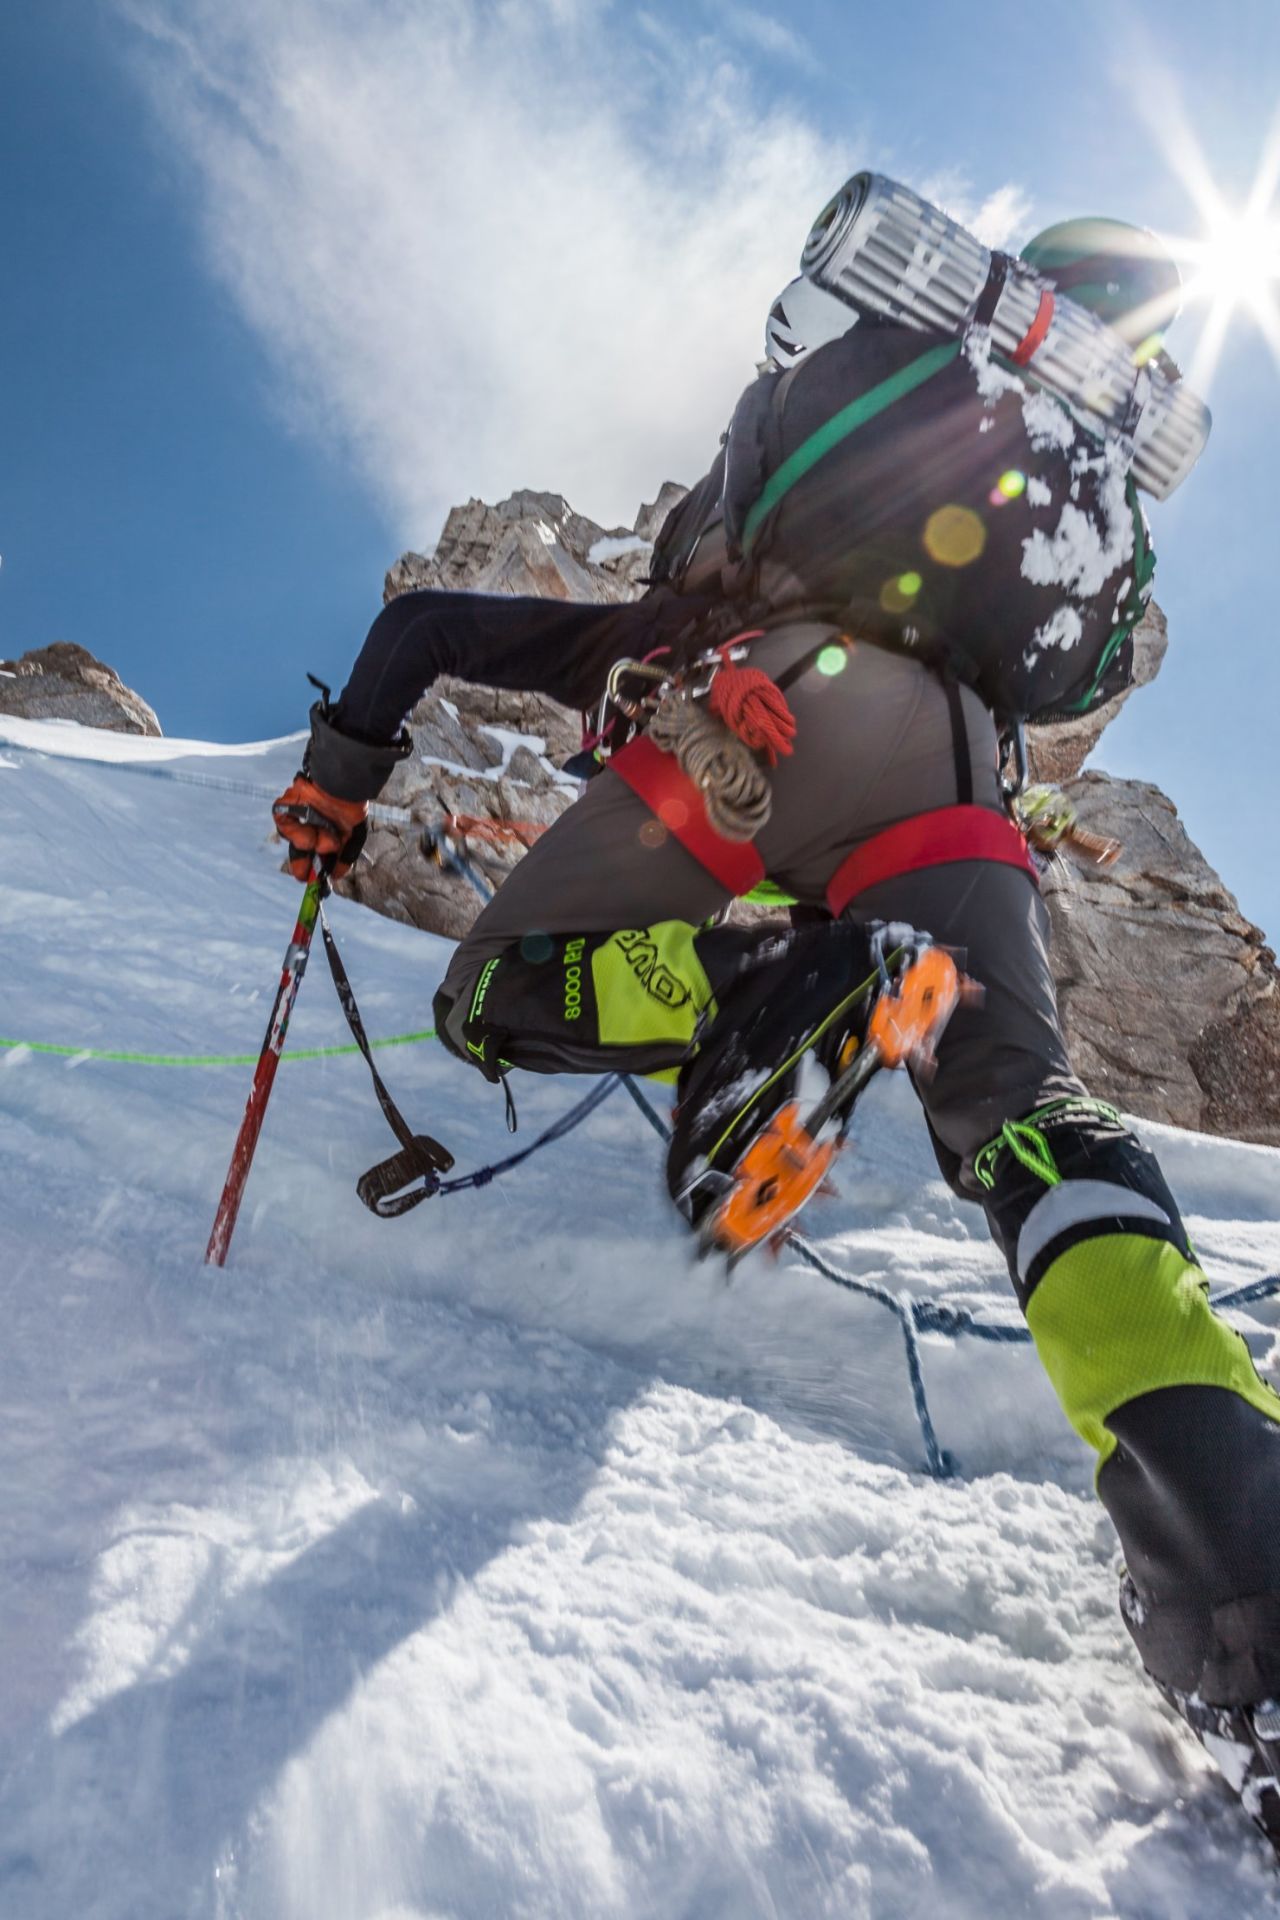 The ridge that traverses from the top of the fixed lines to high camp is one of the most technically challenging parts of the West Buttress route. It requires steep snow climbing and crossing narrow, knife-edge sections all while wearing a heavy pack.